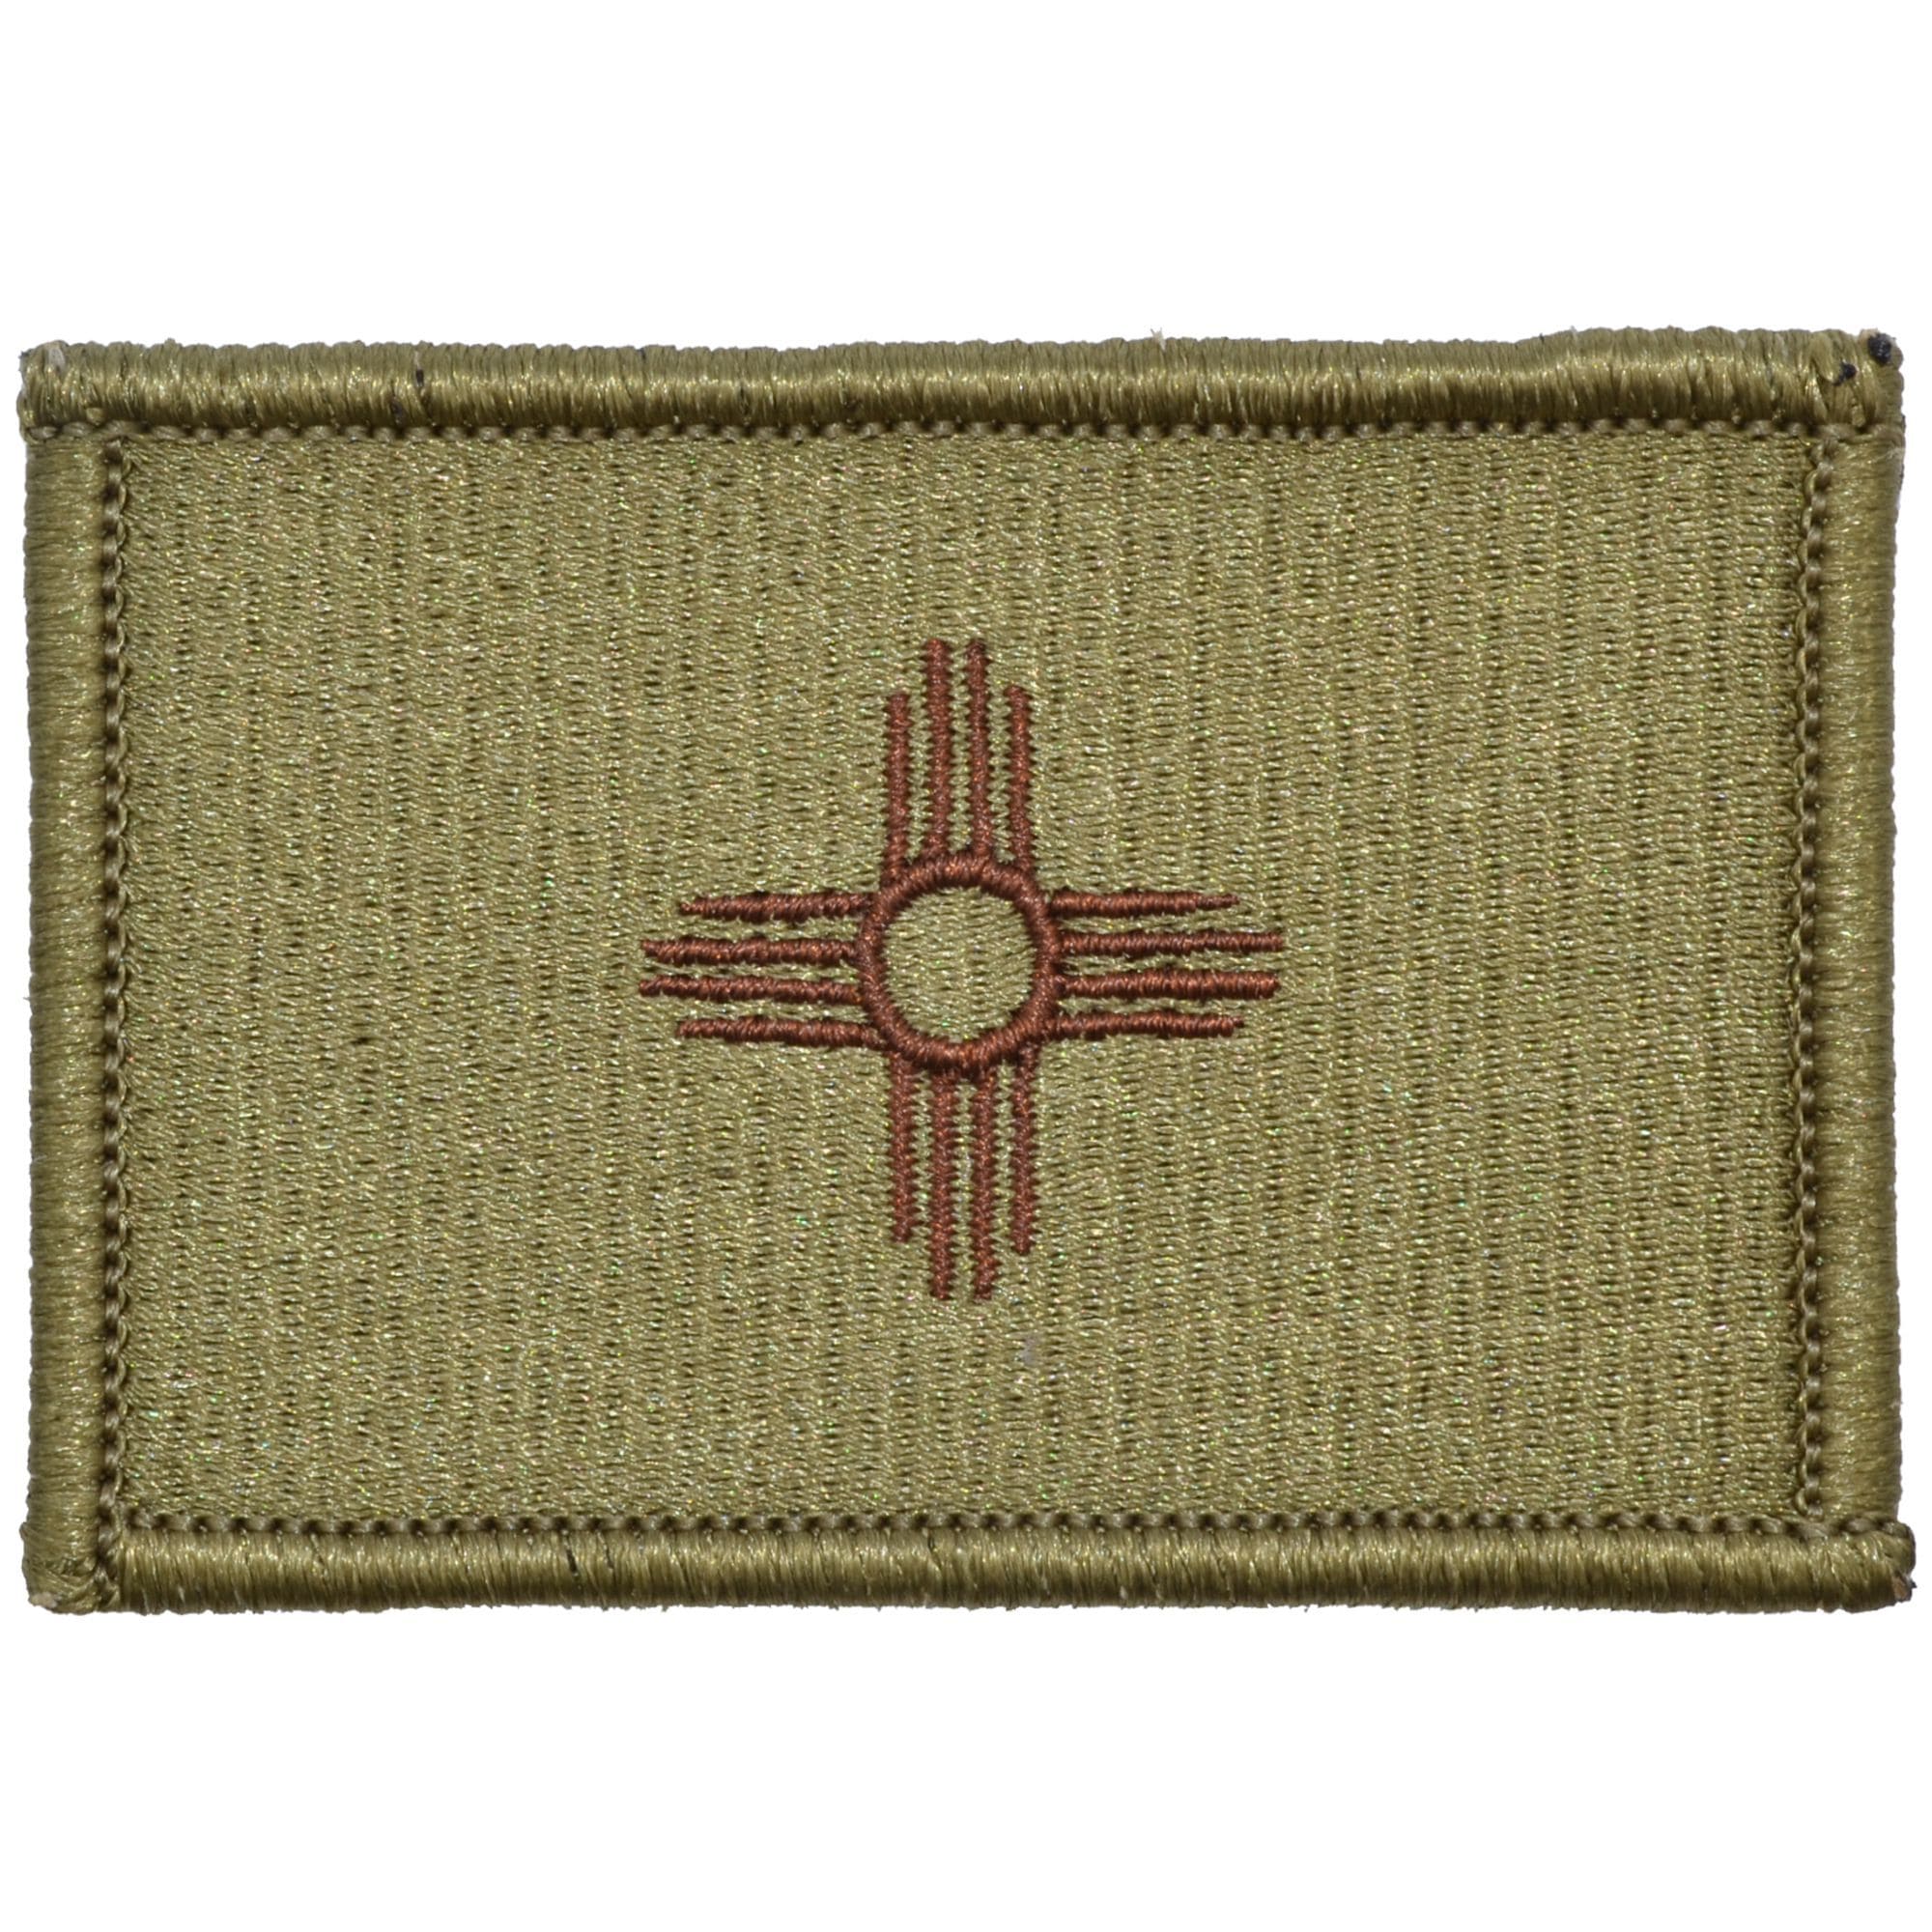 Embroidered Patch Flag Mexico  Reflective Tactical Patch